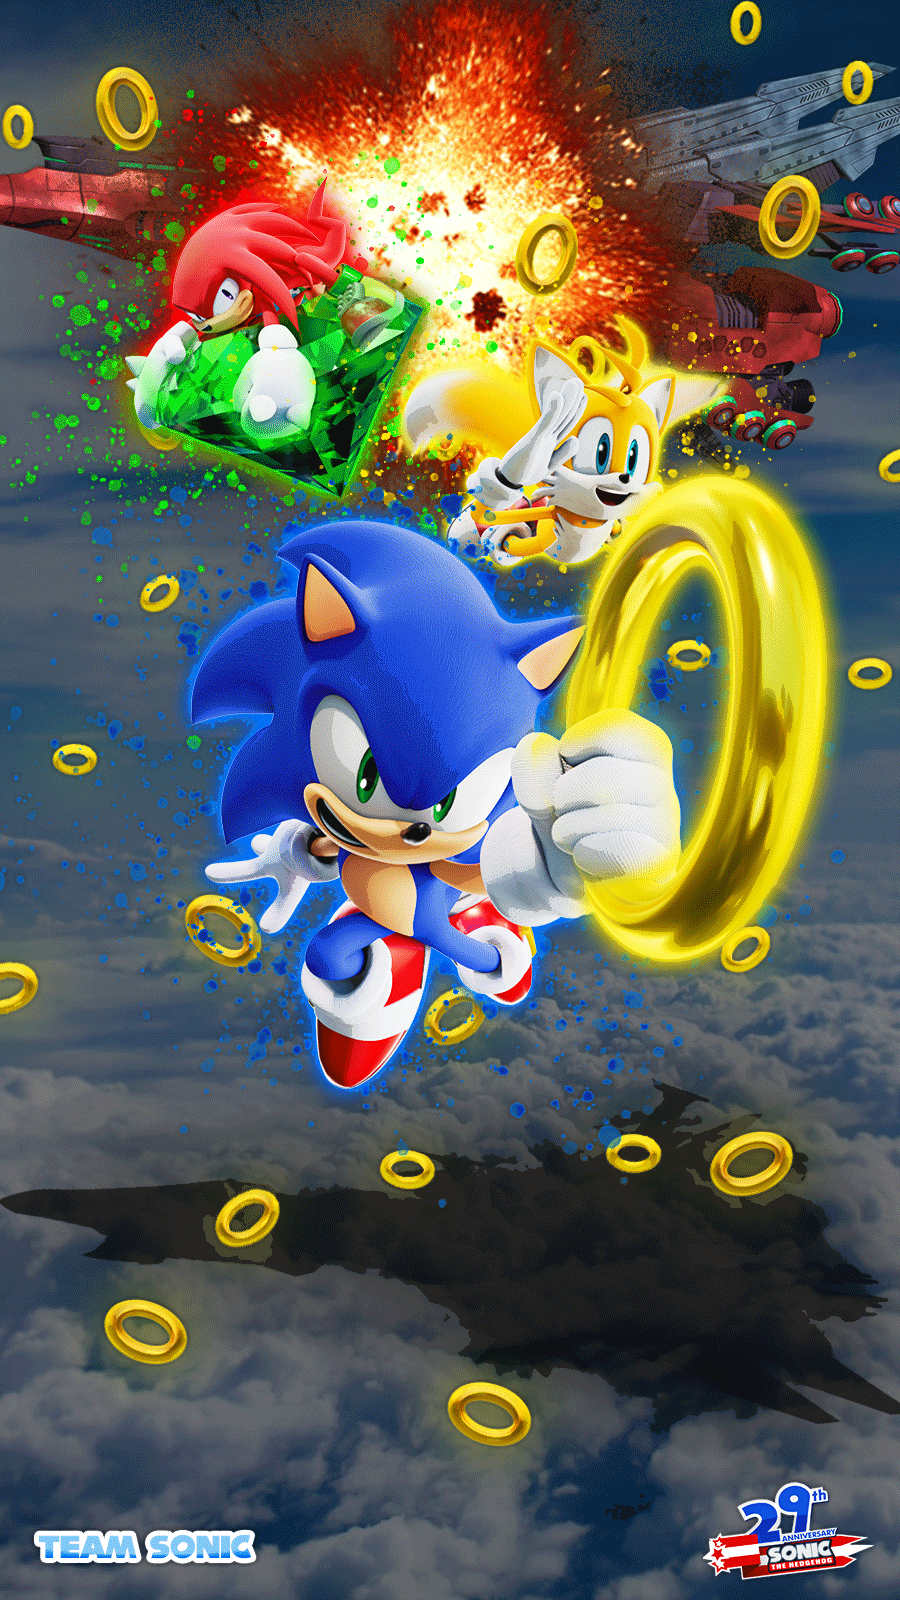 ✪ 2020 DLC ✪ — Sonic the Hedgehog Mobile Wallpapers ~ Team